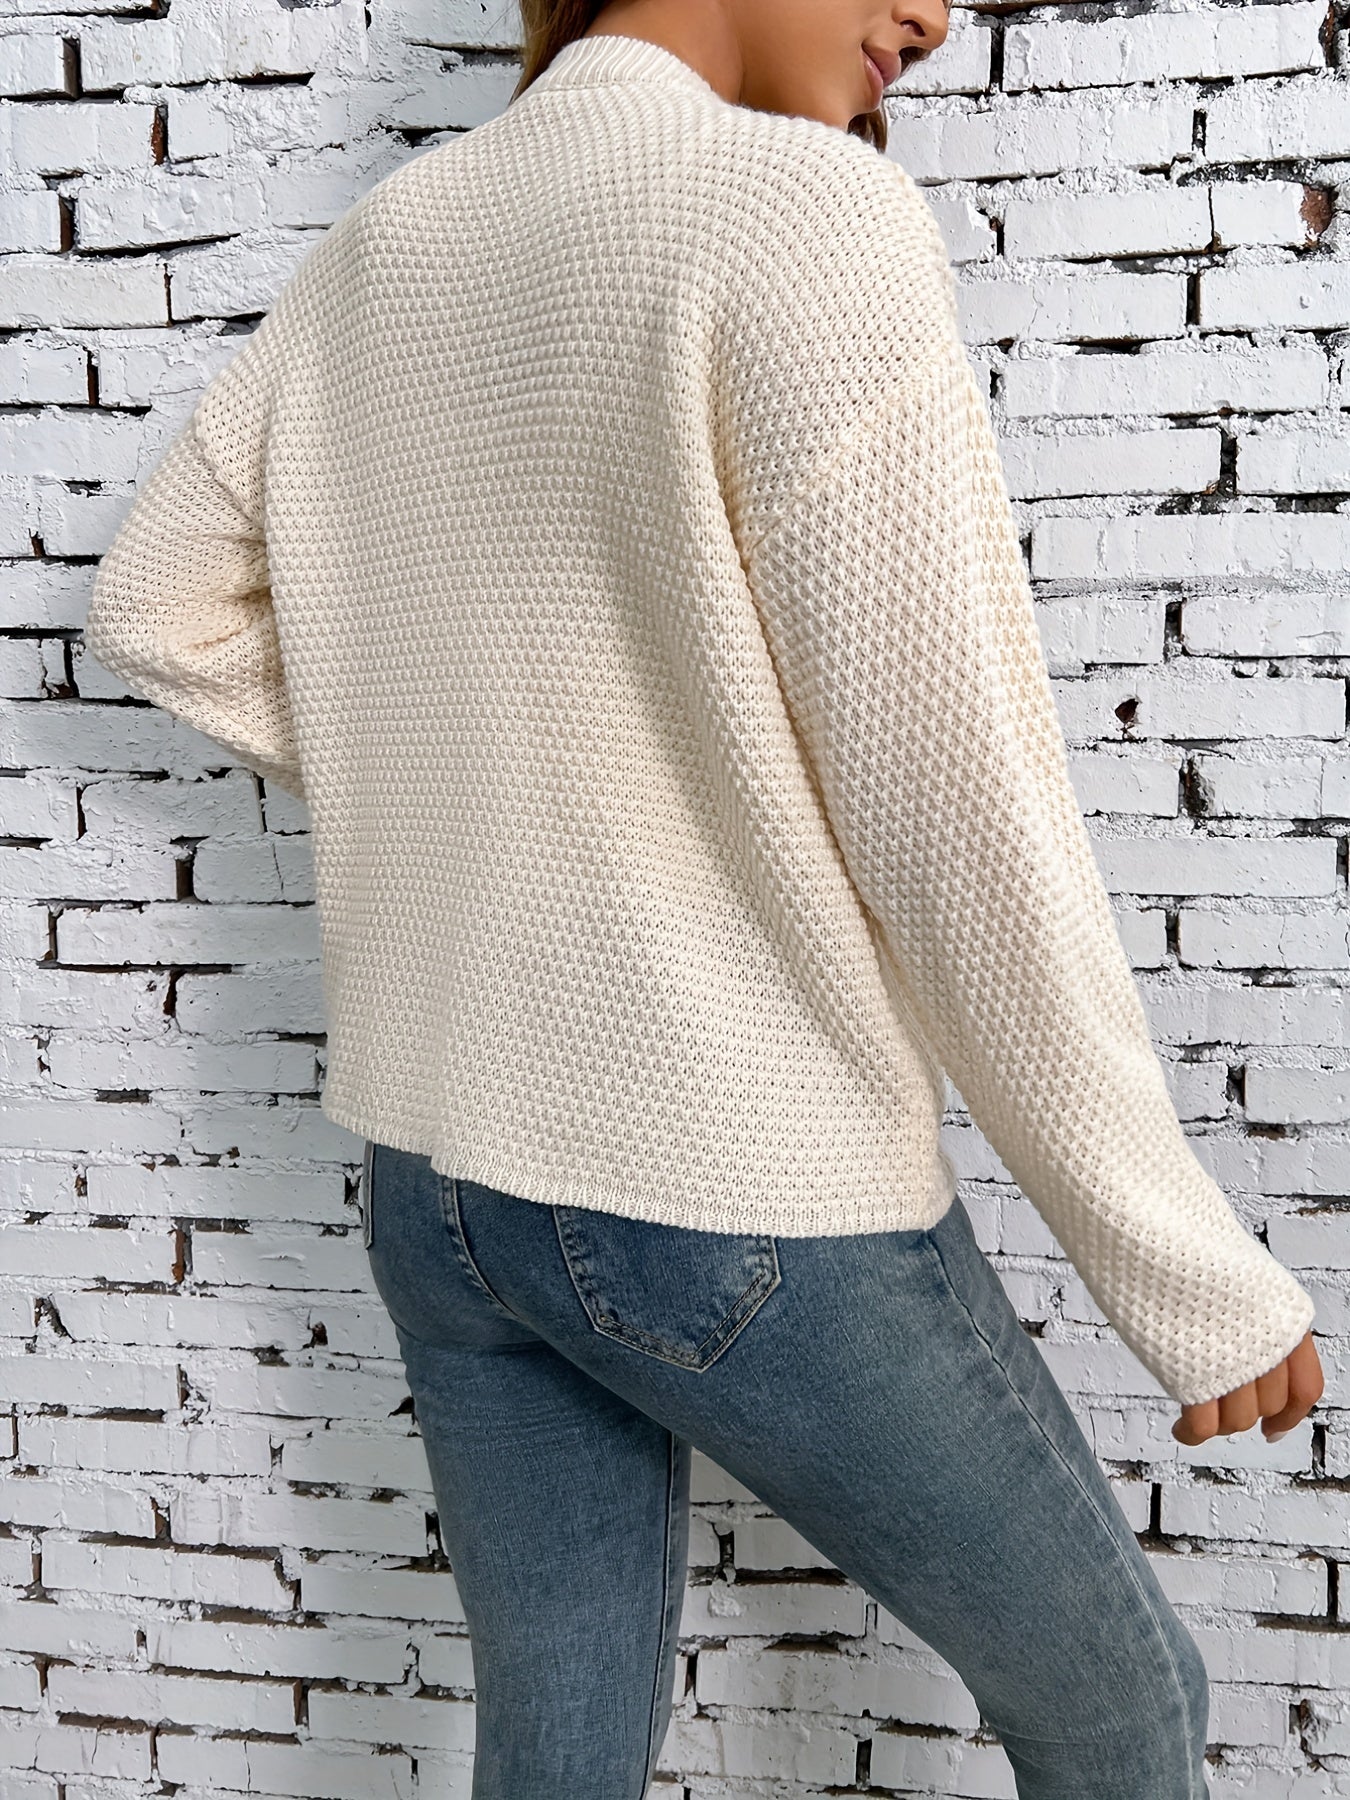 vlovelaw  Solid Quarter Button Knit Sweater, Casual Long Sleeve Loose Sweater, Women's Clothing